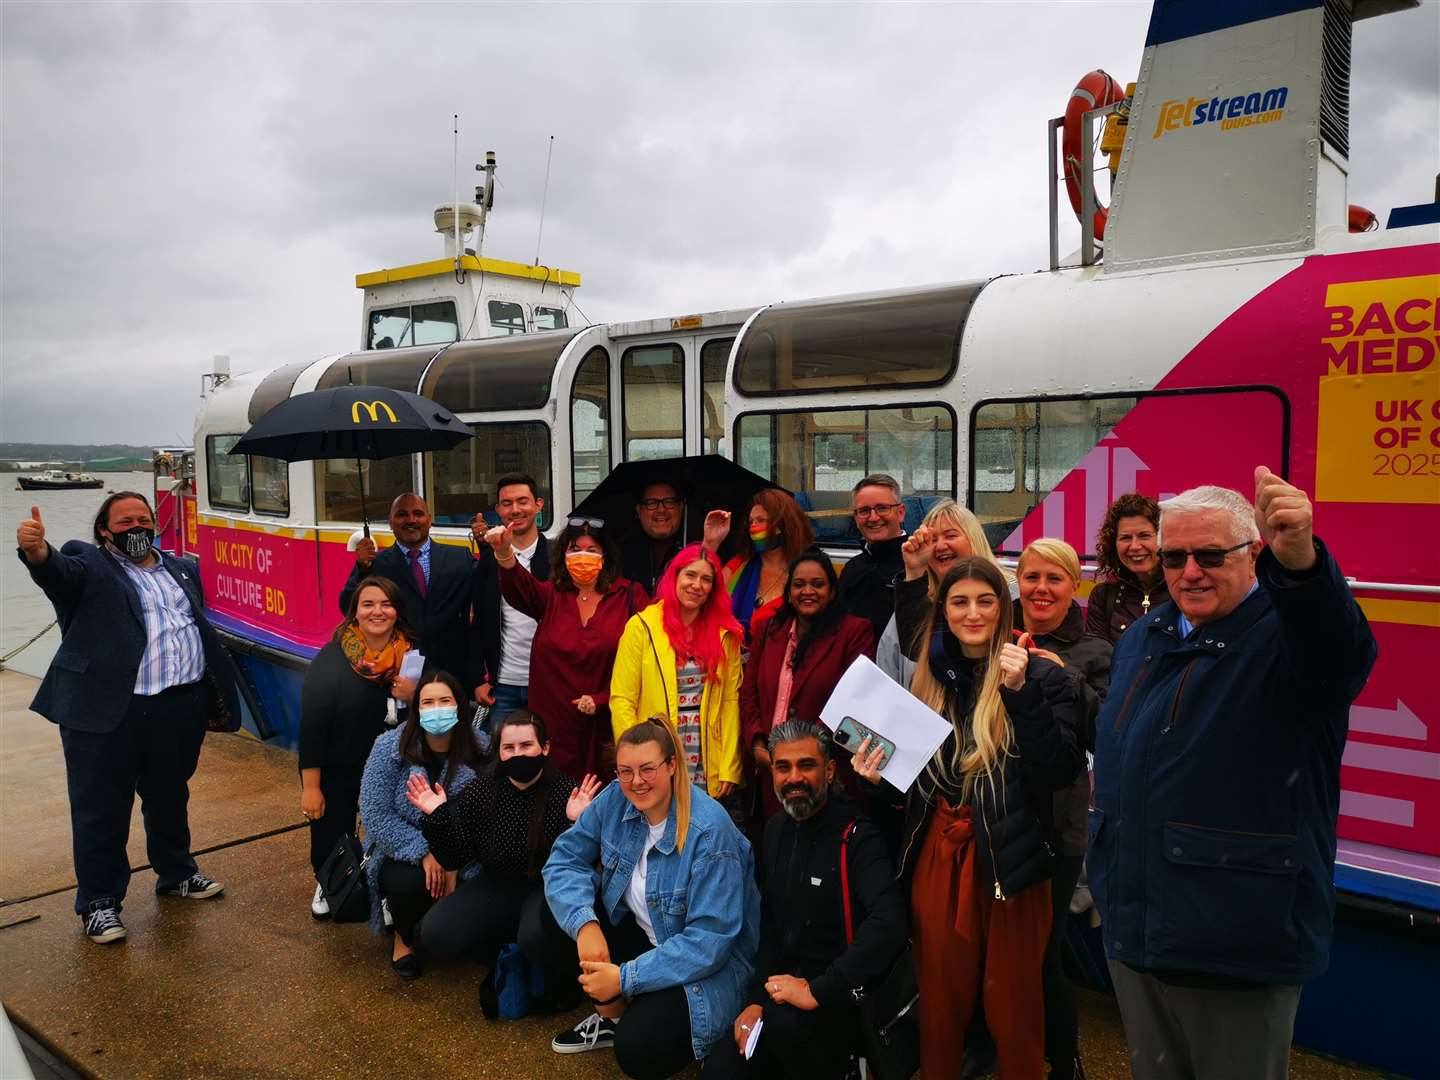 The assembled guests next to the Medway City of Culture 2025 bid boat